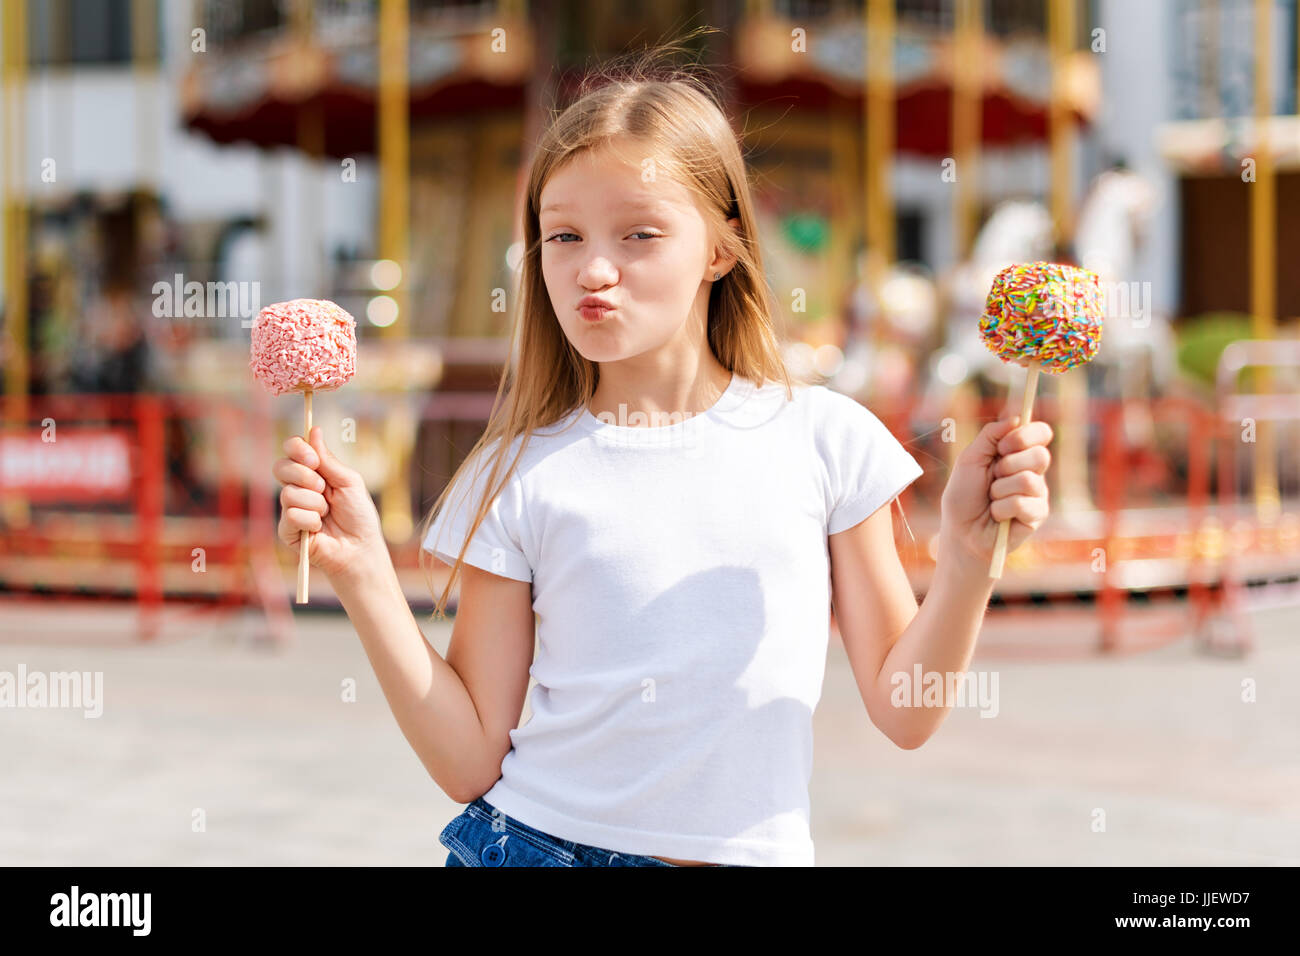 Cute little girl eating candy apple at fair in amusement park. Stock Photo